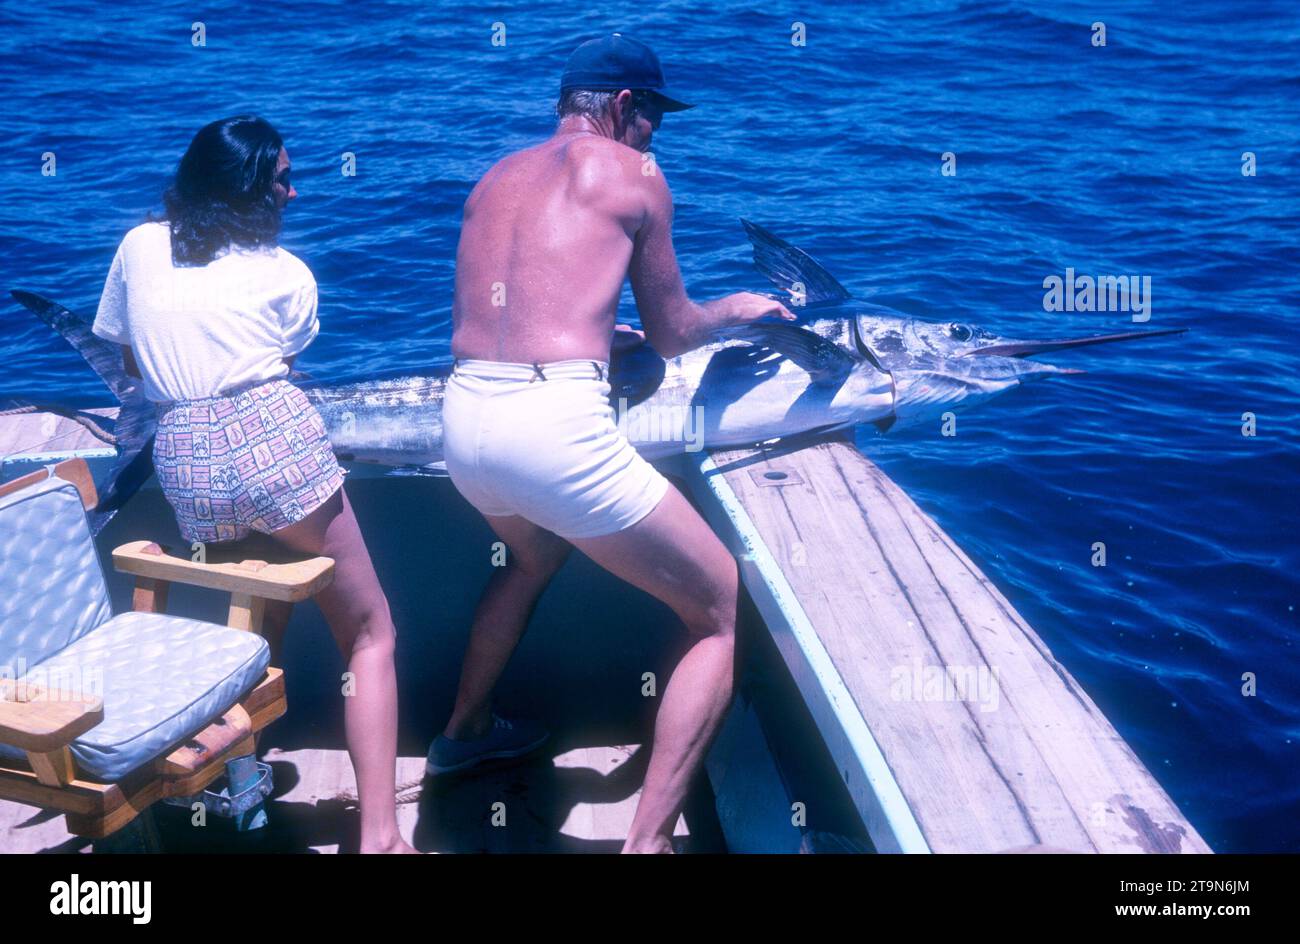 BAJA CALIFORNIA, MEXICO - JUNE, 1962:  Actor and former baseball player Chuck Connors (1921-1992) and actress fiance Kamala Devi (1934-2010) pull a marlin on the boat while on a fishing trip circa June, 1962 in Baja California, Mexico.  (Photo by Hy Peskin) *** Local Caption *** Kamala Devi;Chuck Connors Stock Photo